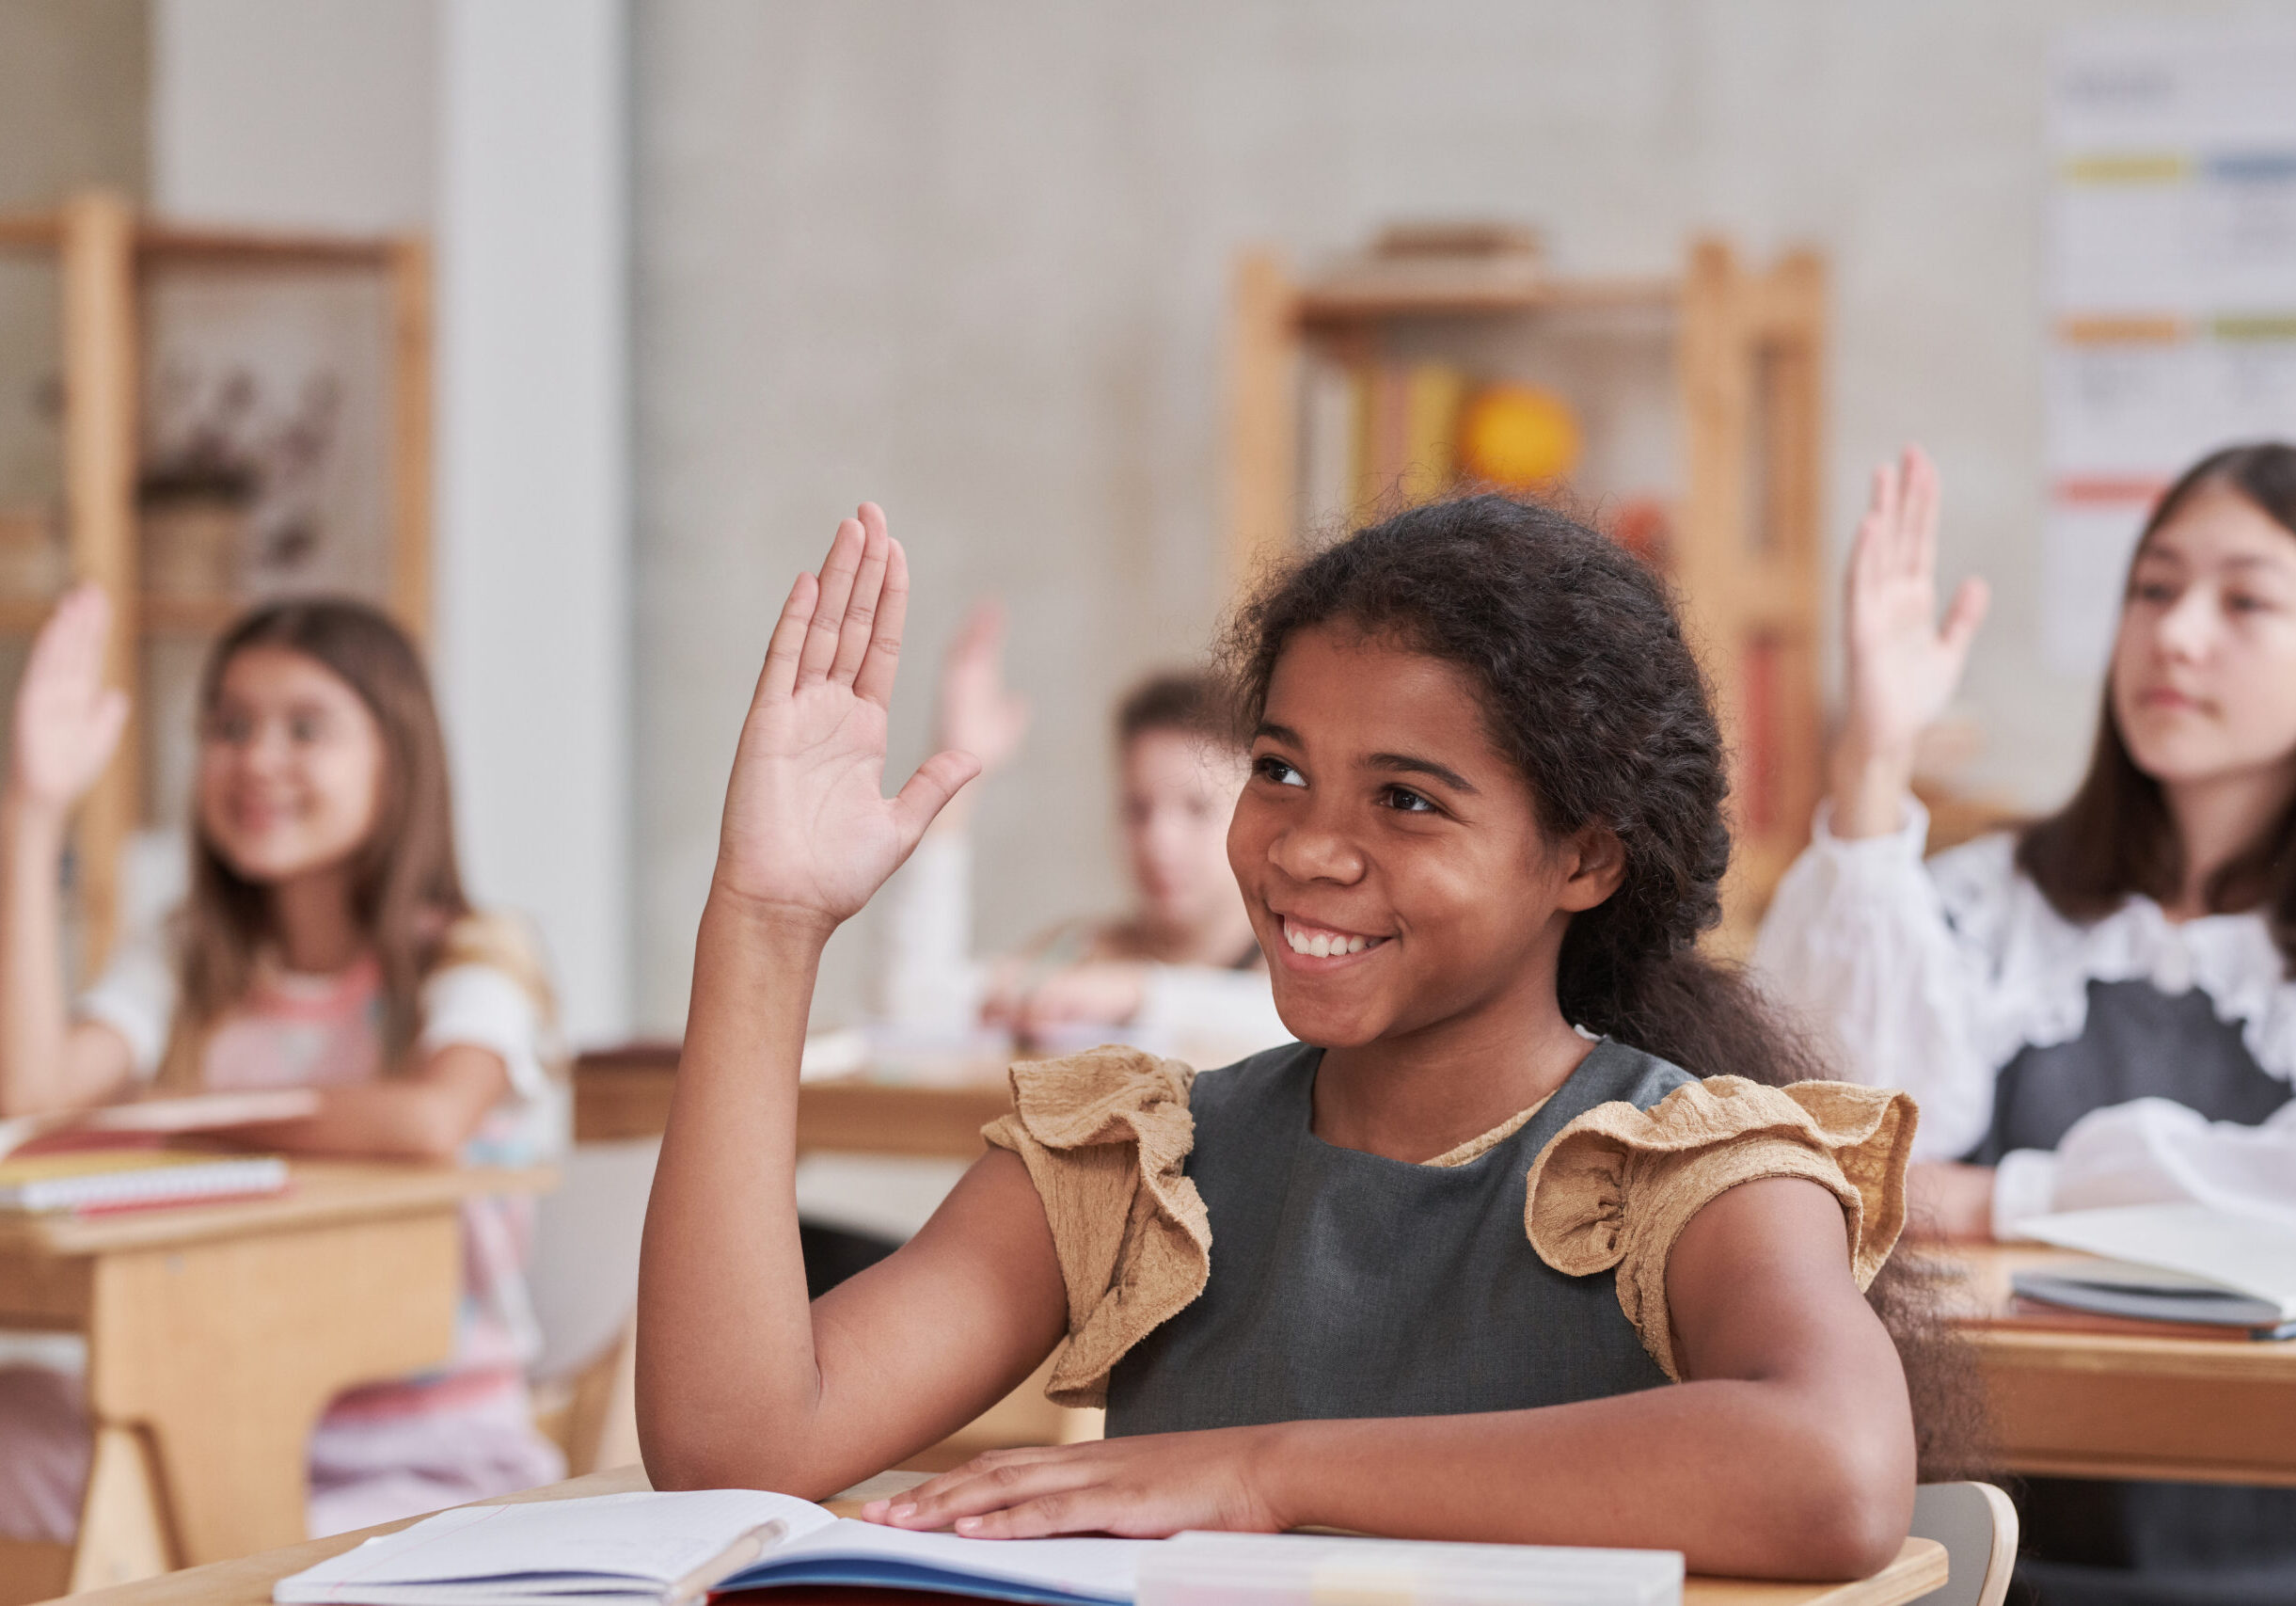 Portrait of smiling African-American schoolgirl raising hand while sitting at desk in classroom, copy space